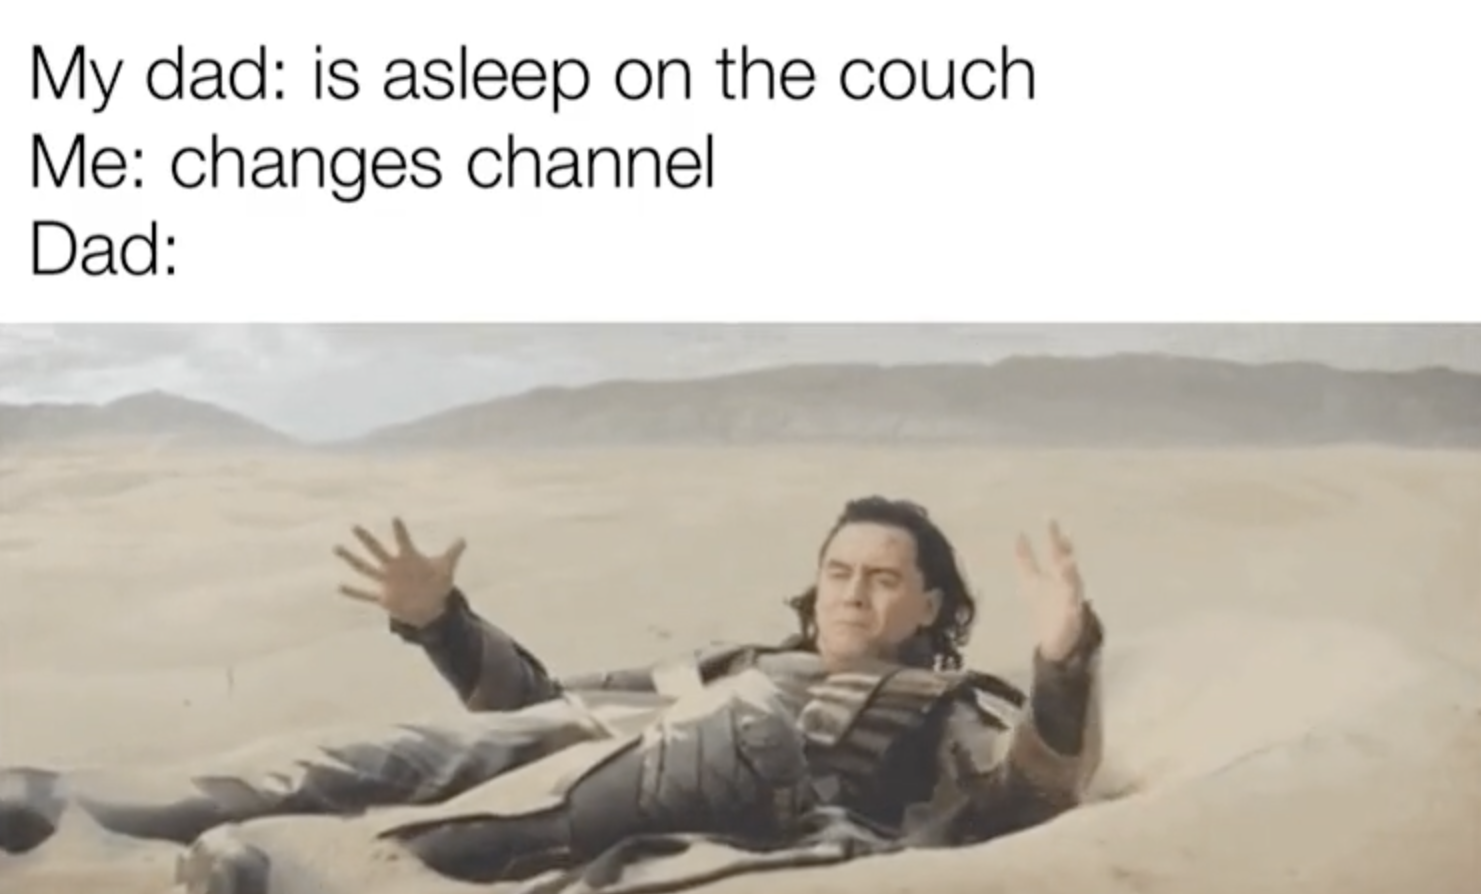 cookie memes - My dad is asleep on the couch Me changes channel Dad